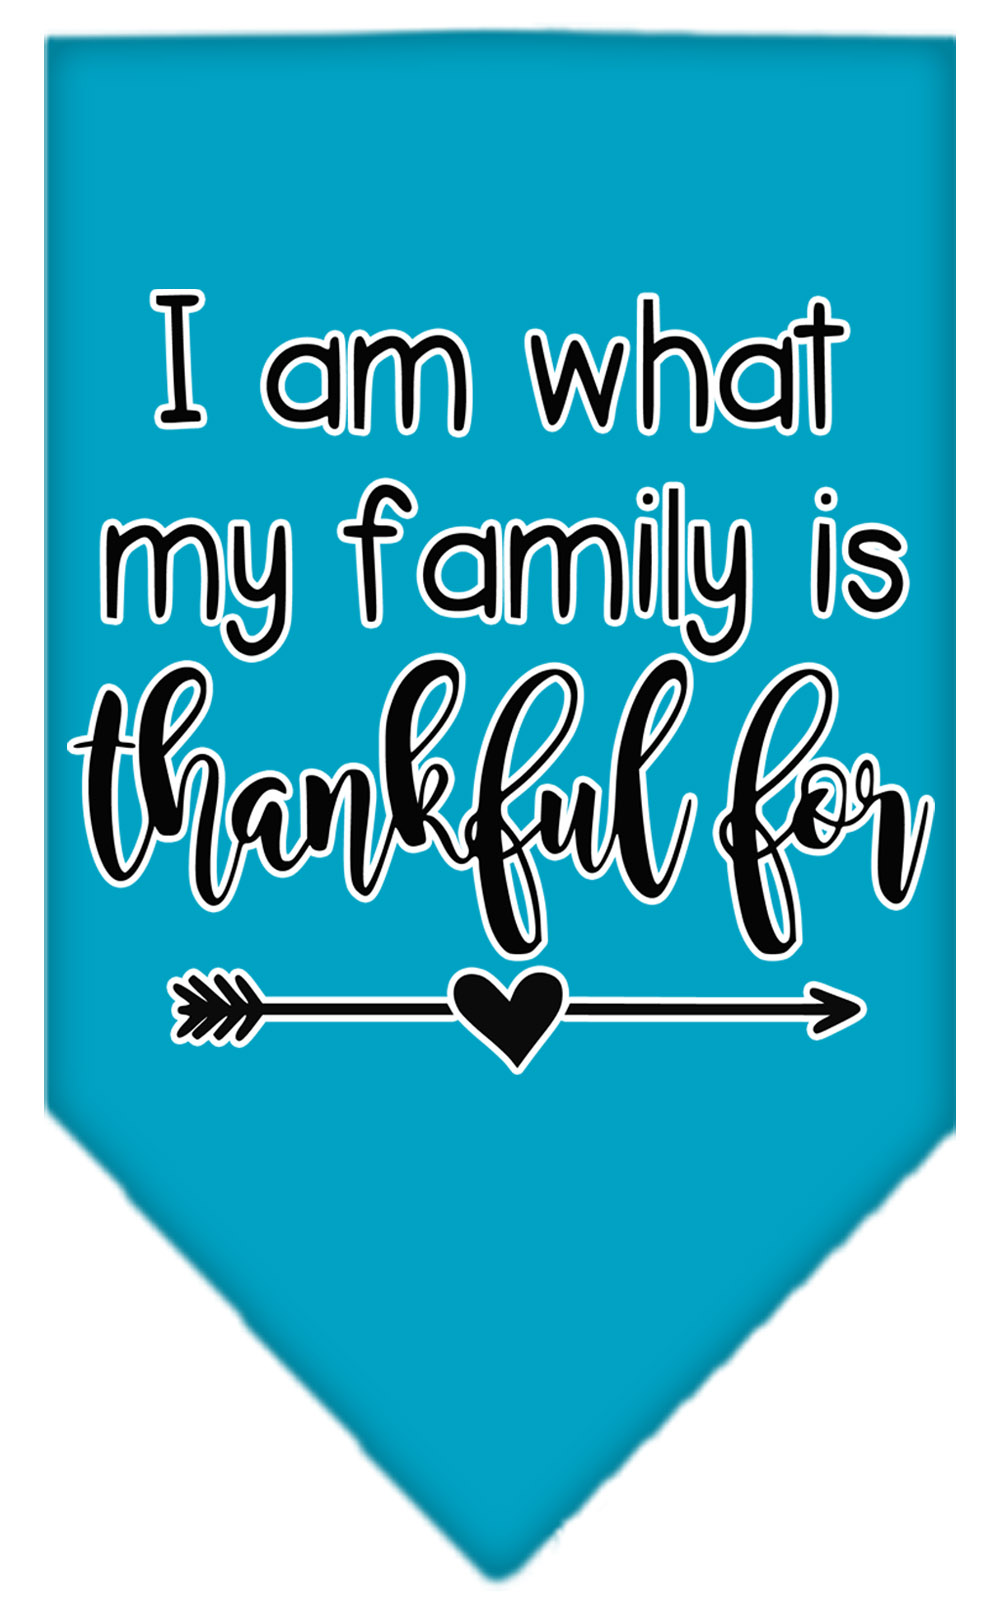 I Am What My Family is Thankful For Screen Print Bandana Turquoise Large